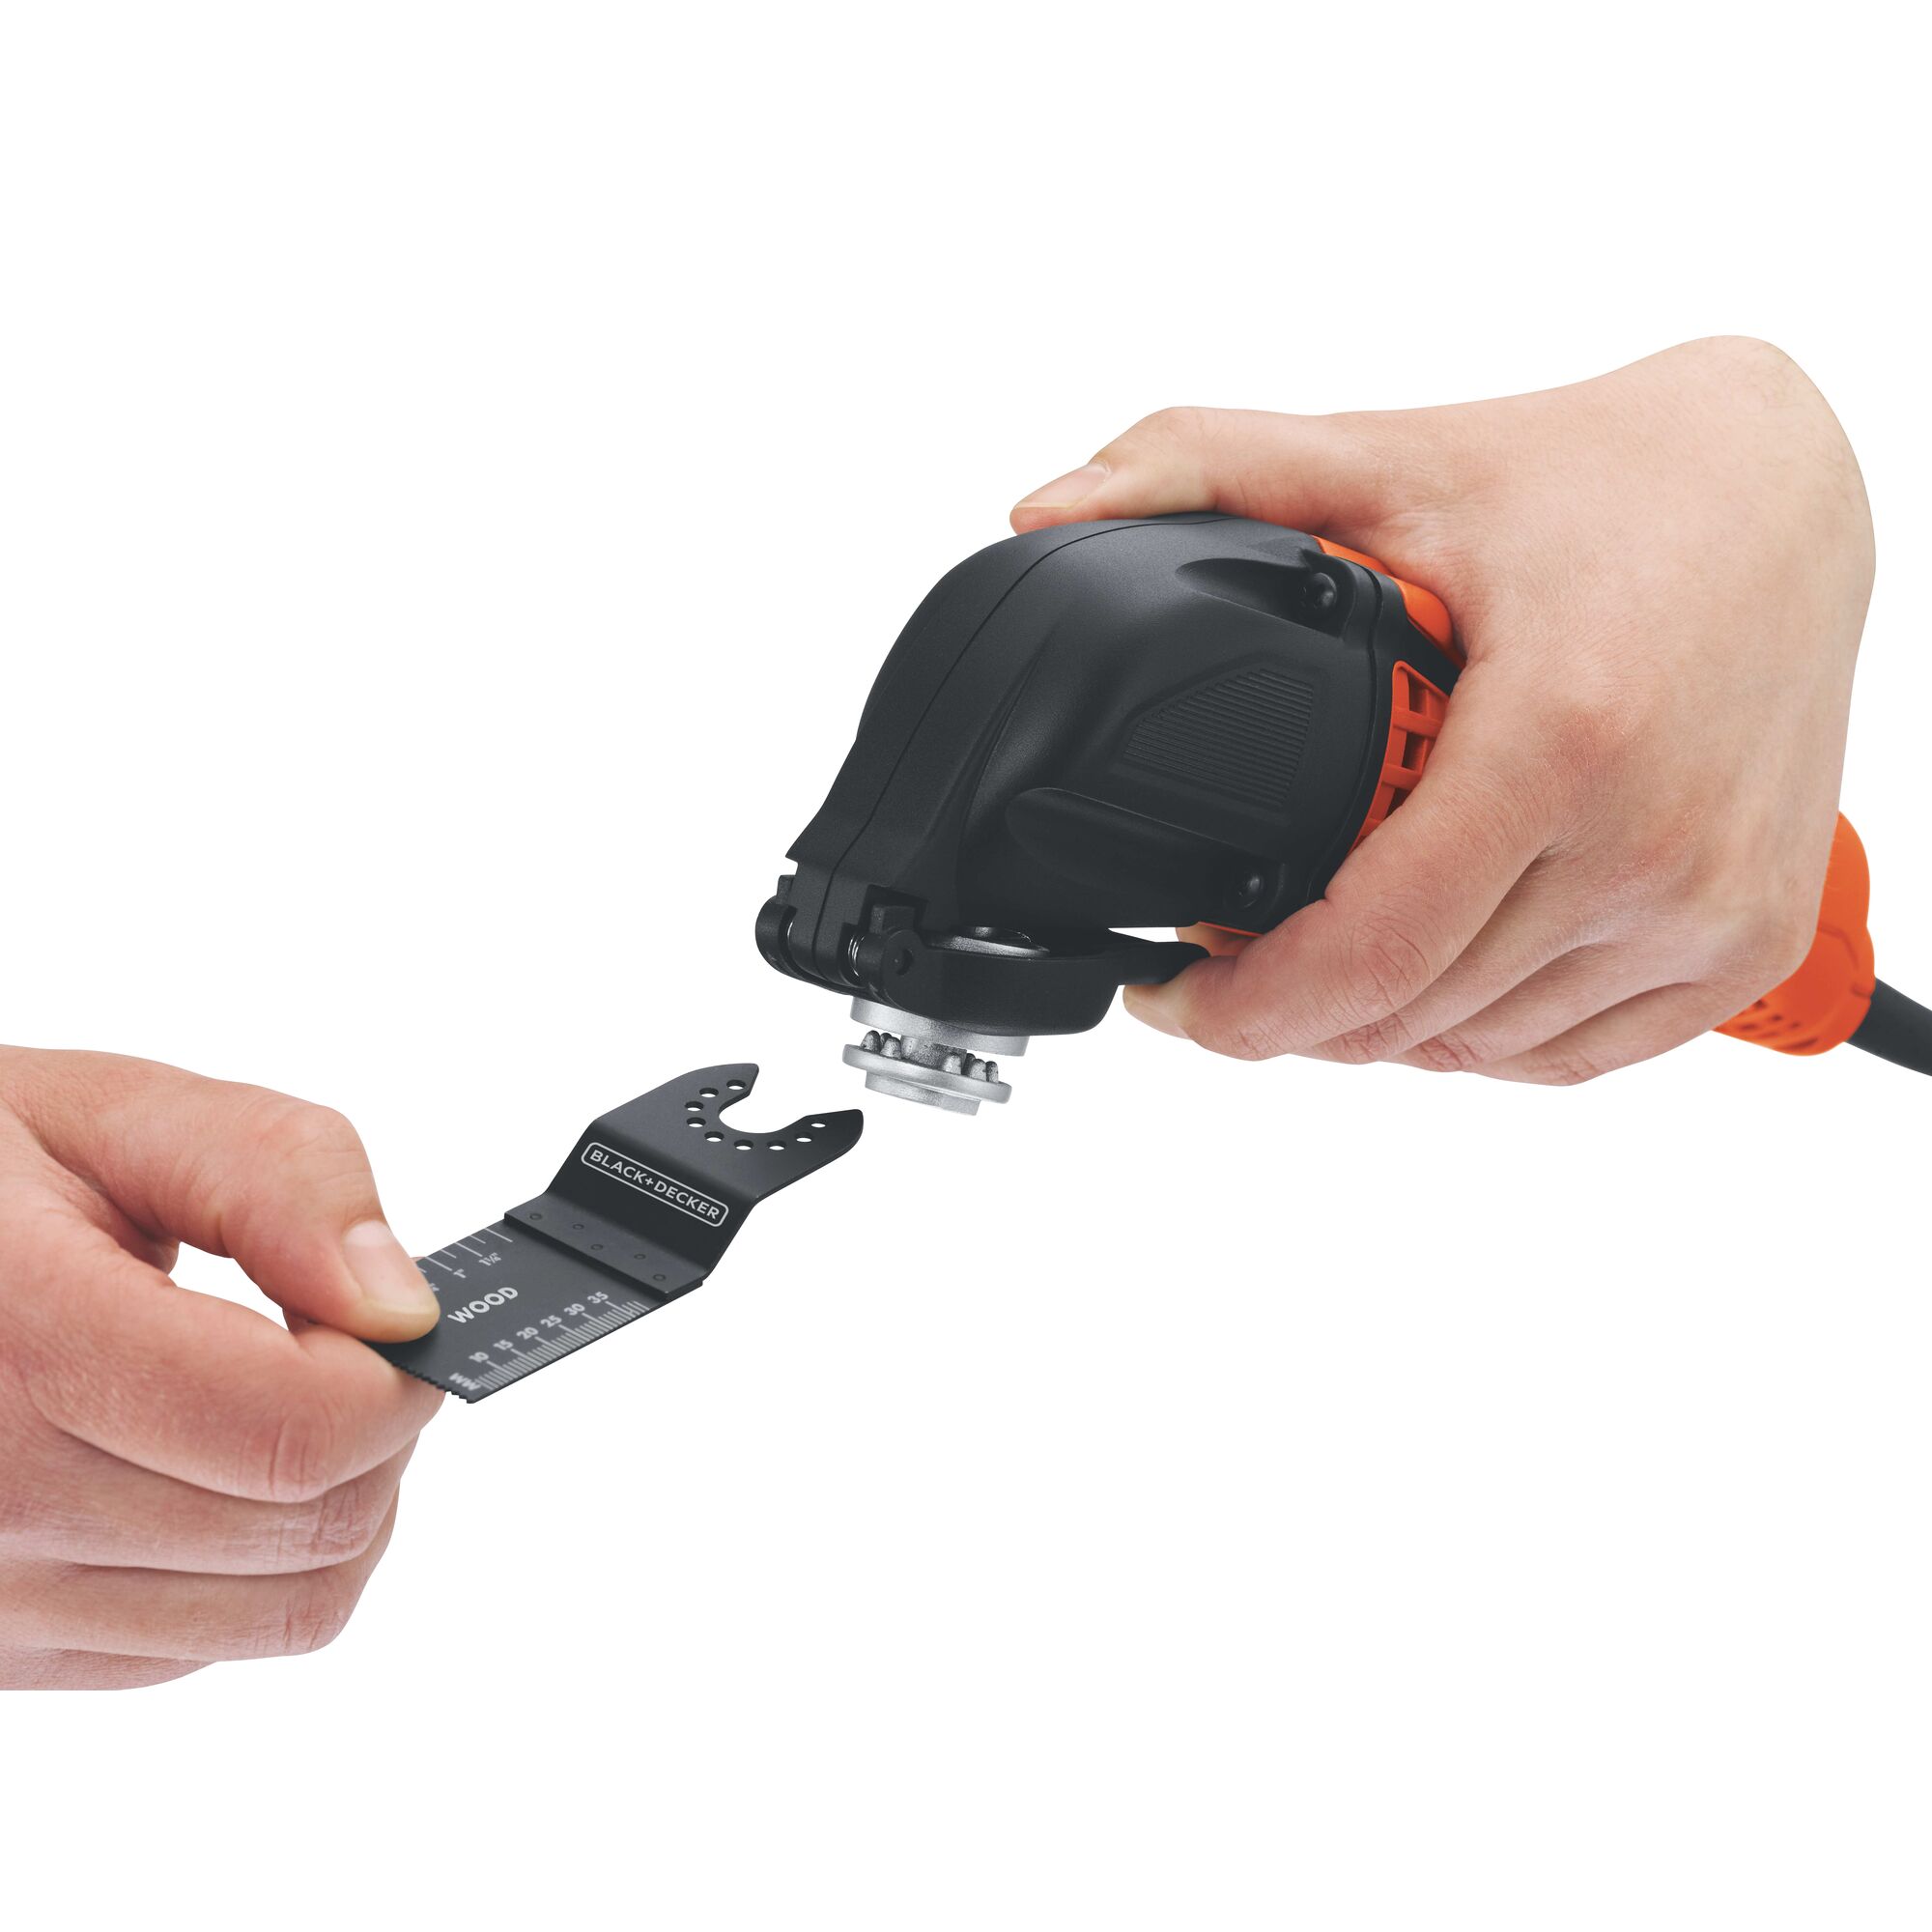 Tool free release feature of 2.5 Amp Oscillating Multi Tool.